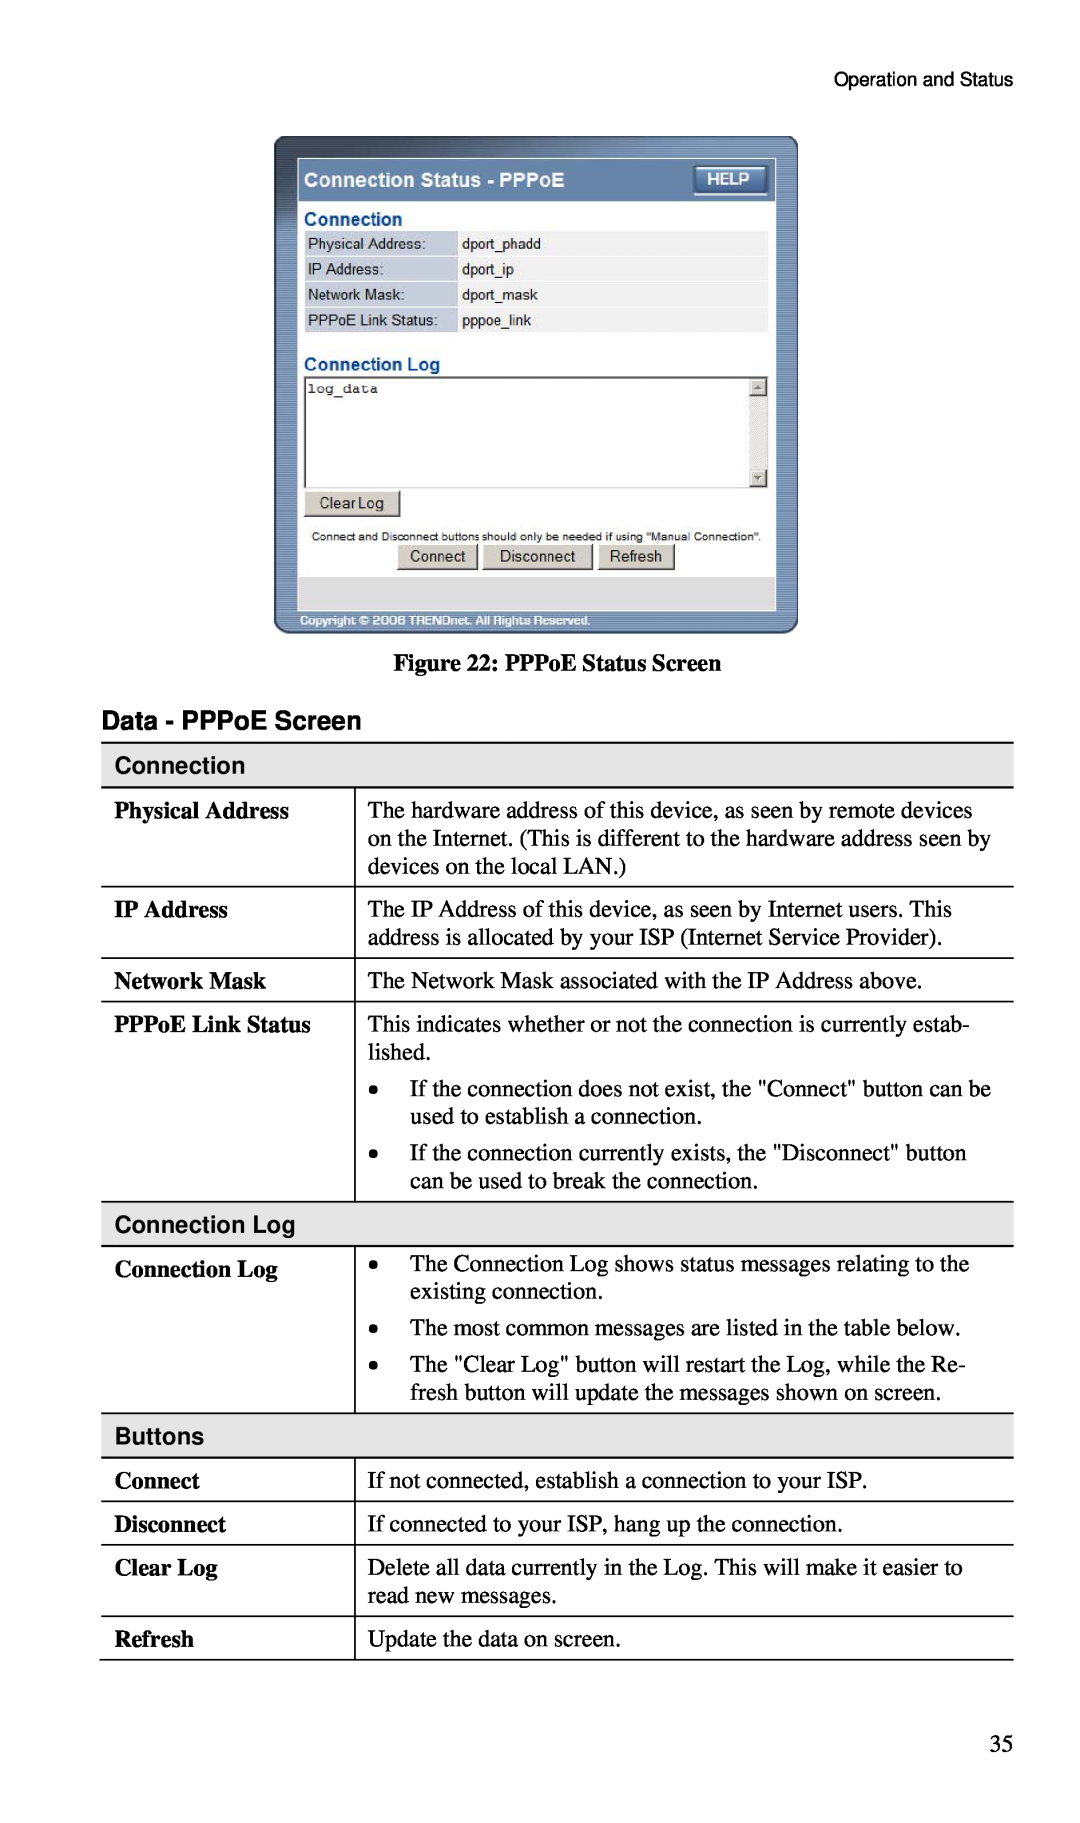 TRENDnet BRF114 PPPoE Status Screen, Connection, Physical Address, IP Address, Network Mask, PPPoE Link Status, Buttons 